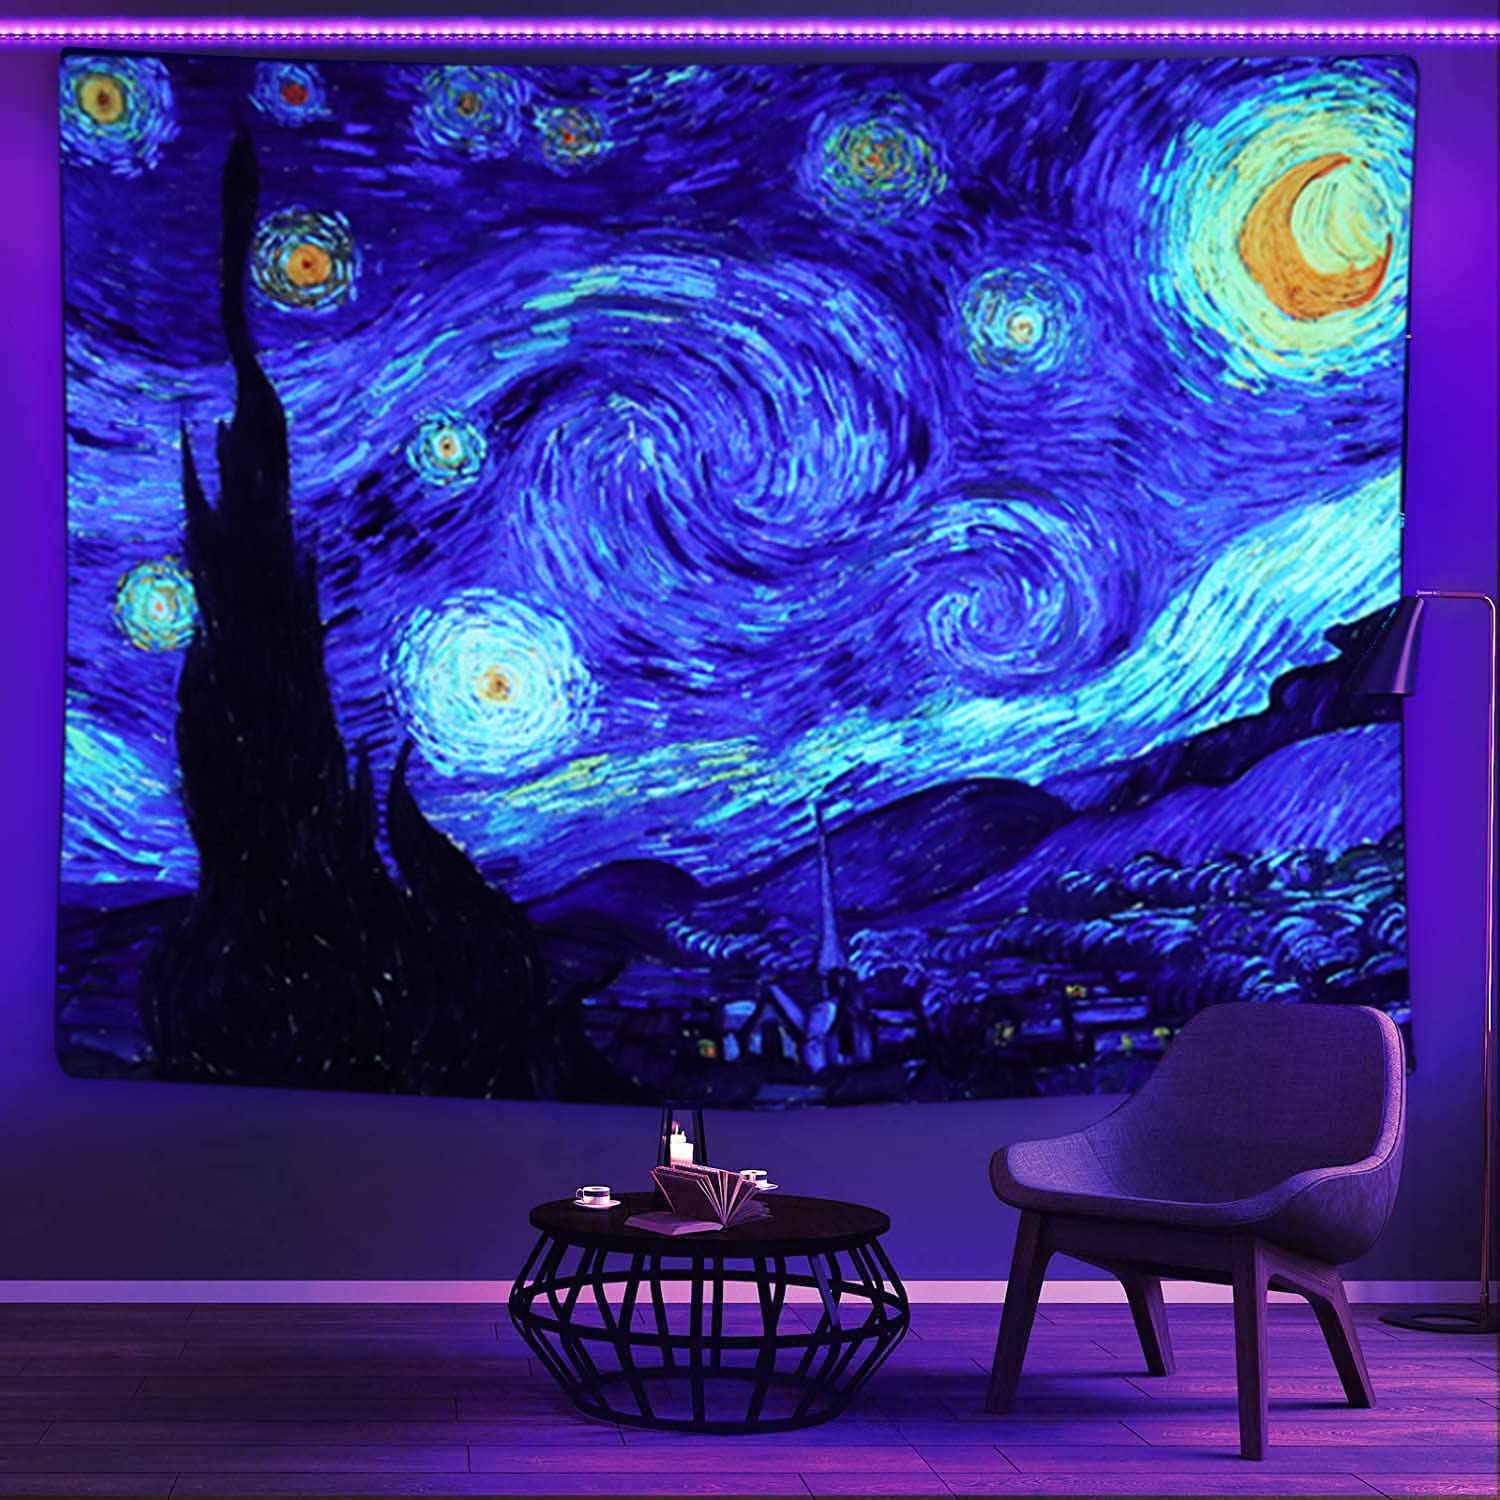 Sinsoledad blacklight tapestry starry night by van gogh wall art decor for bedroom aesthetic abstract hippie trippy wall hanging uv reactive fabric poster for living room dorm dãcor